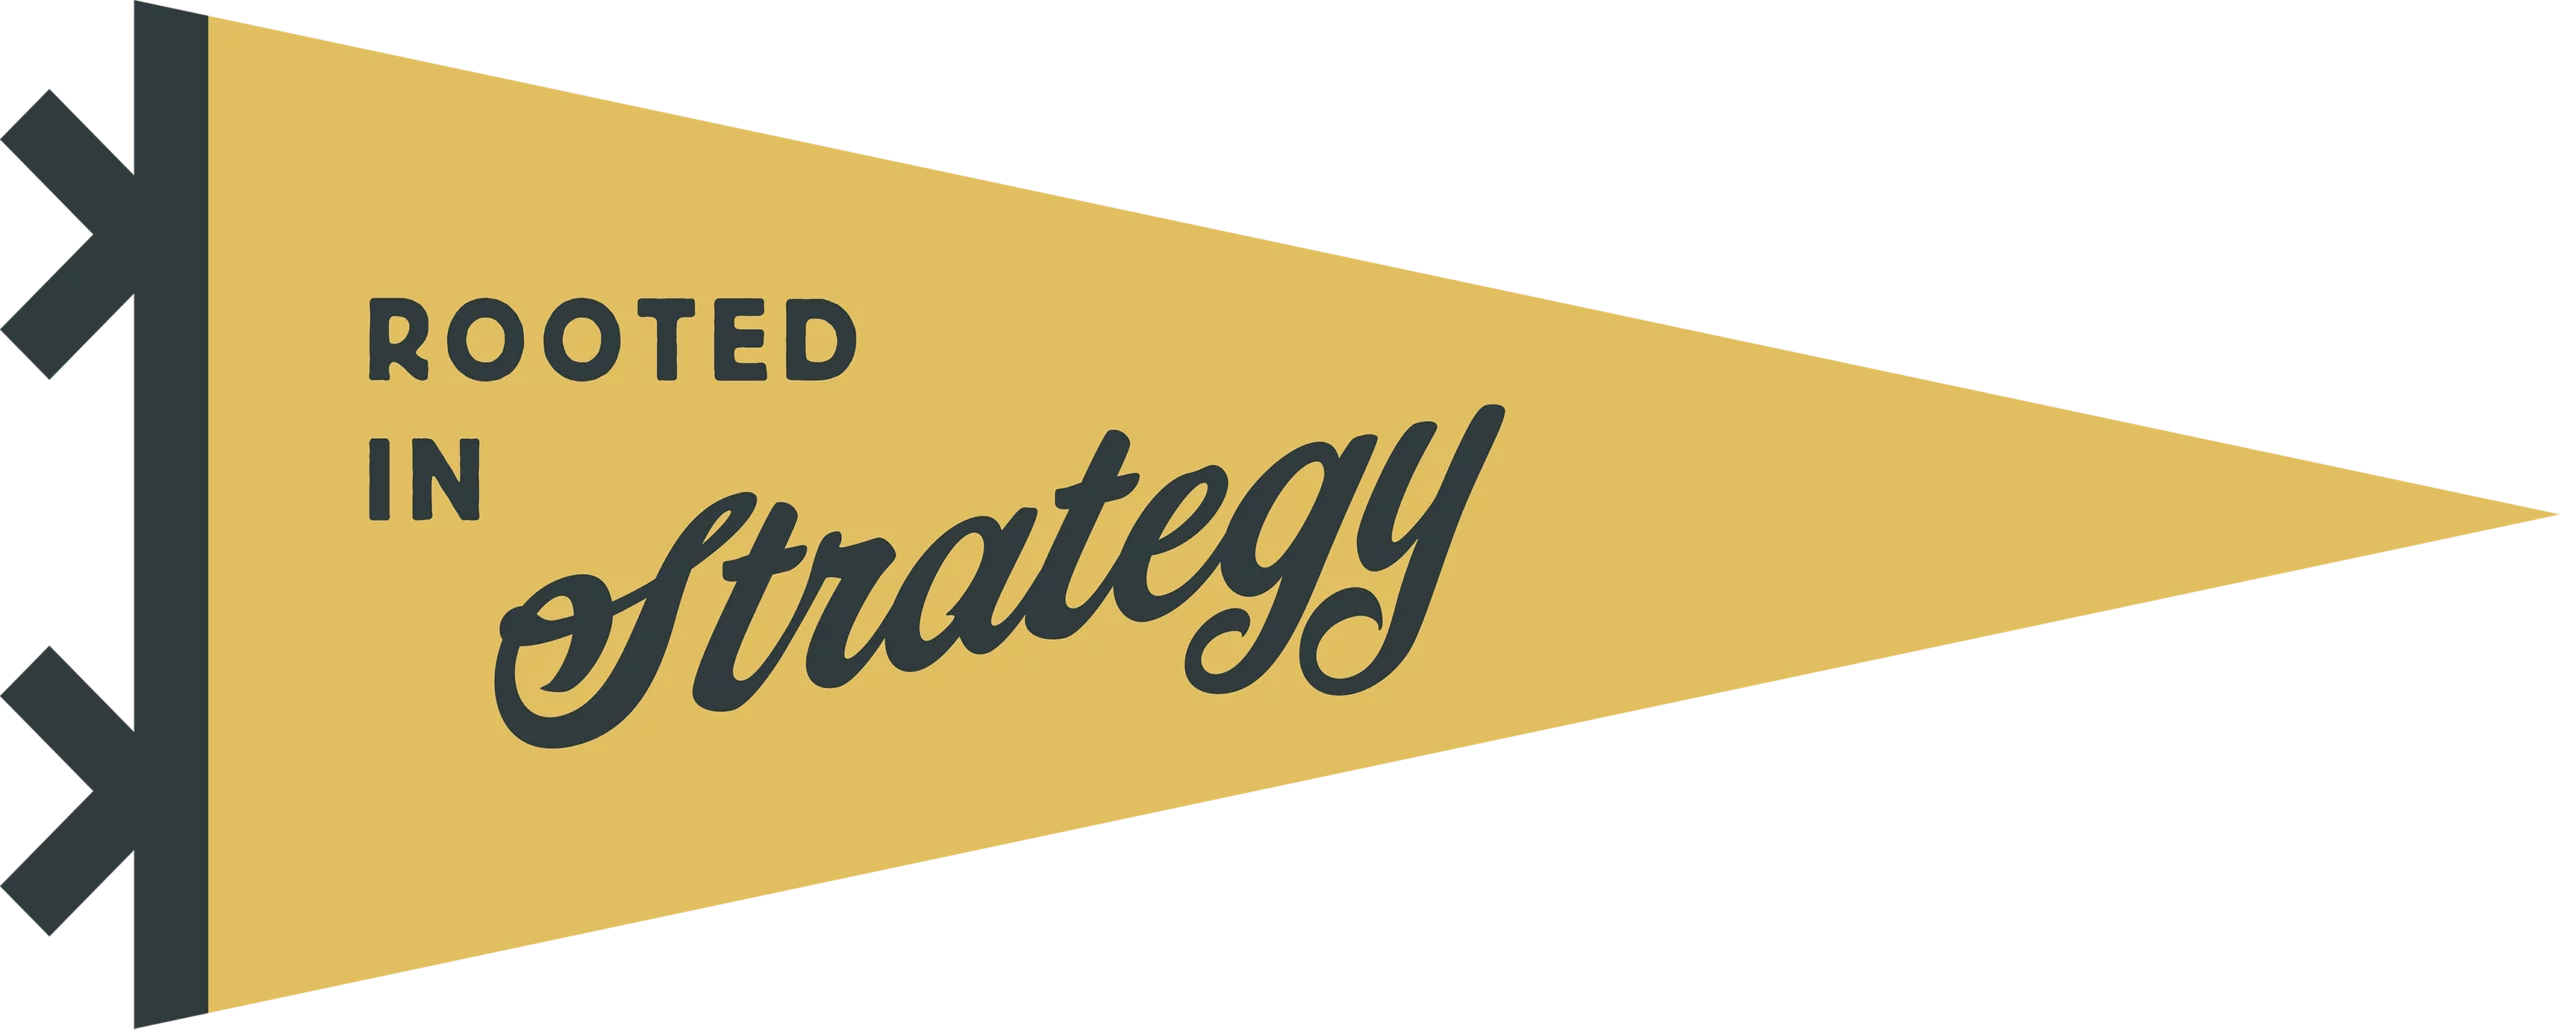 Pennant that reads "Rooted in Strategy"